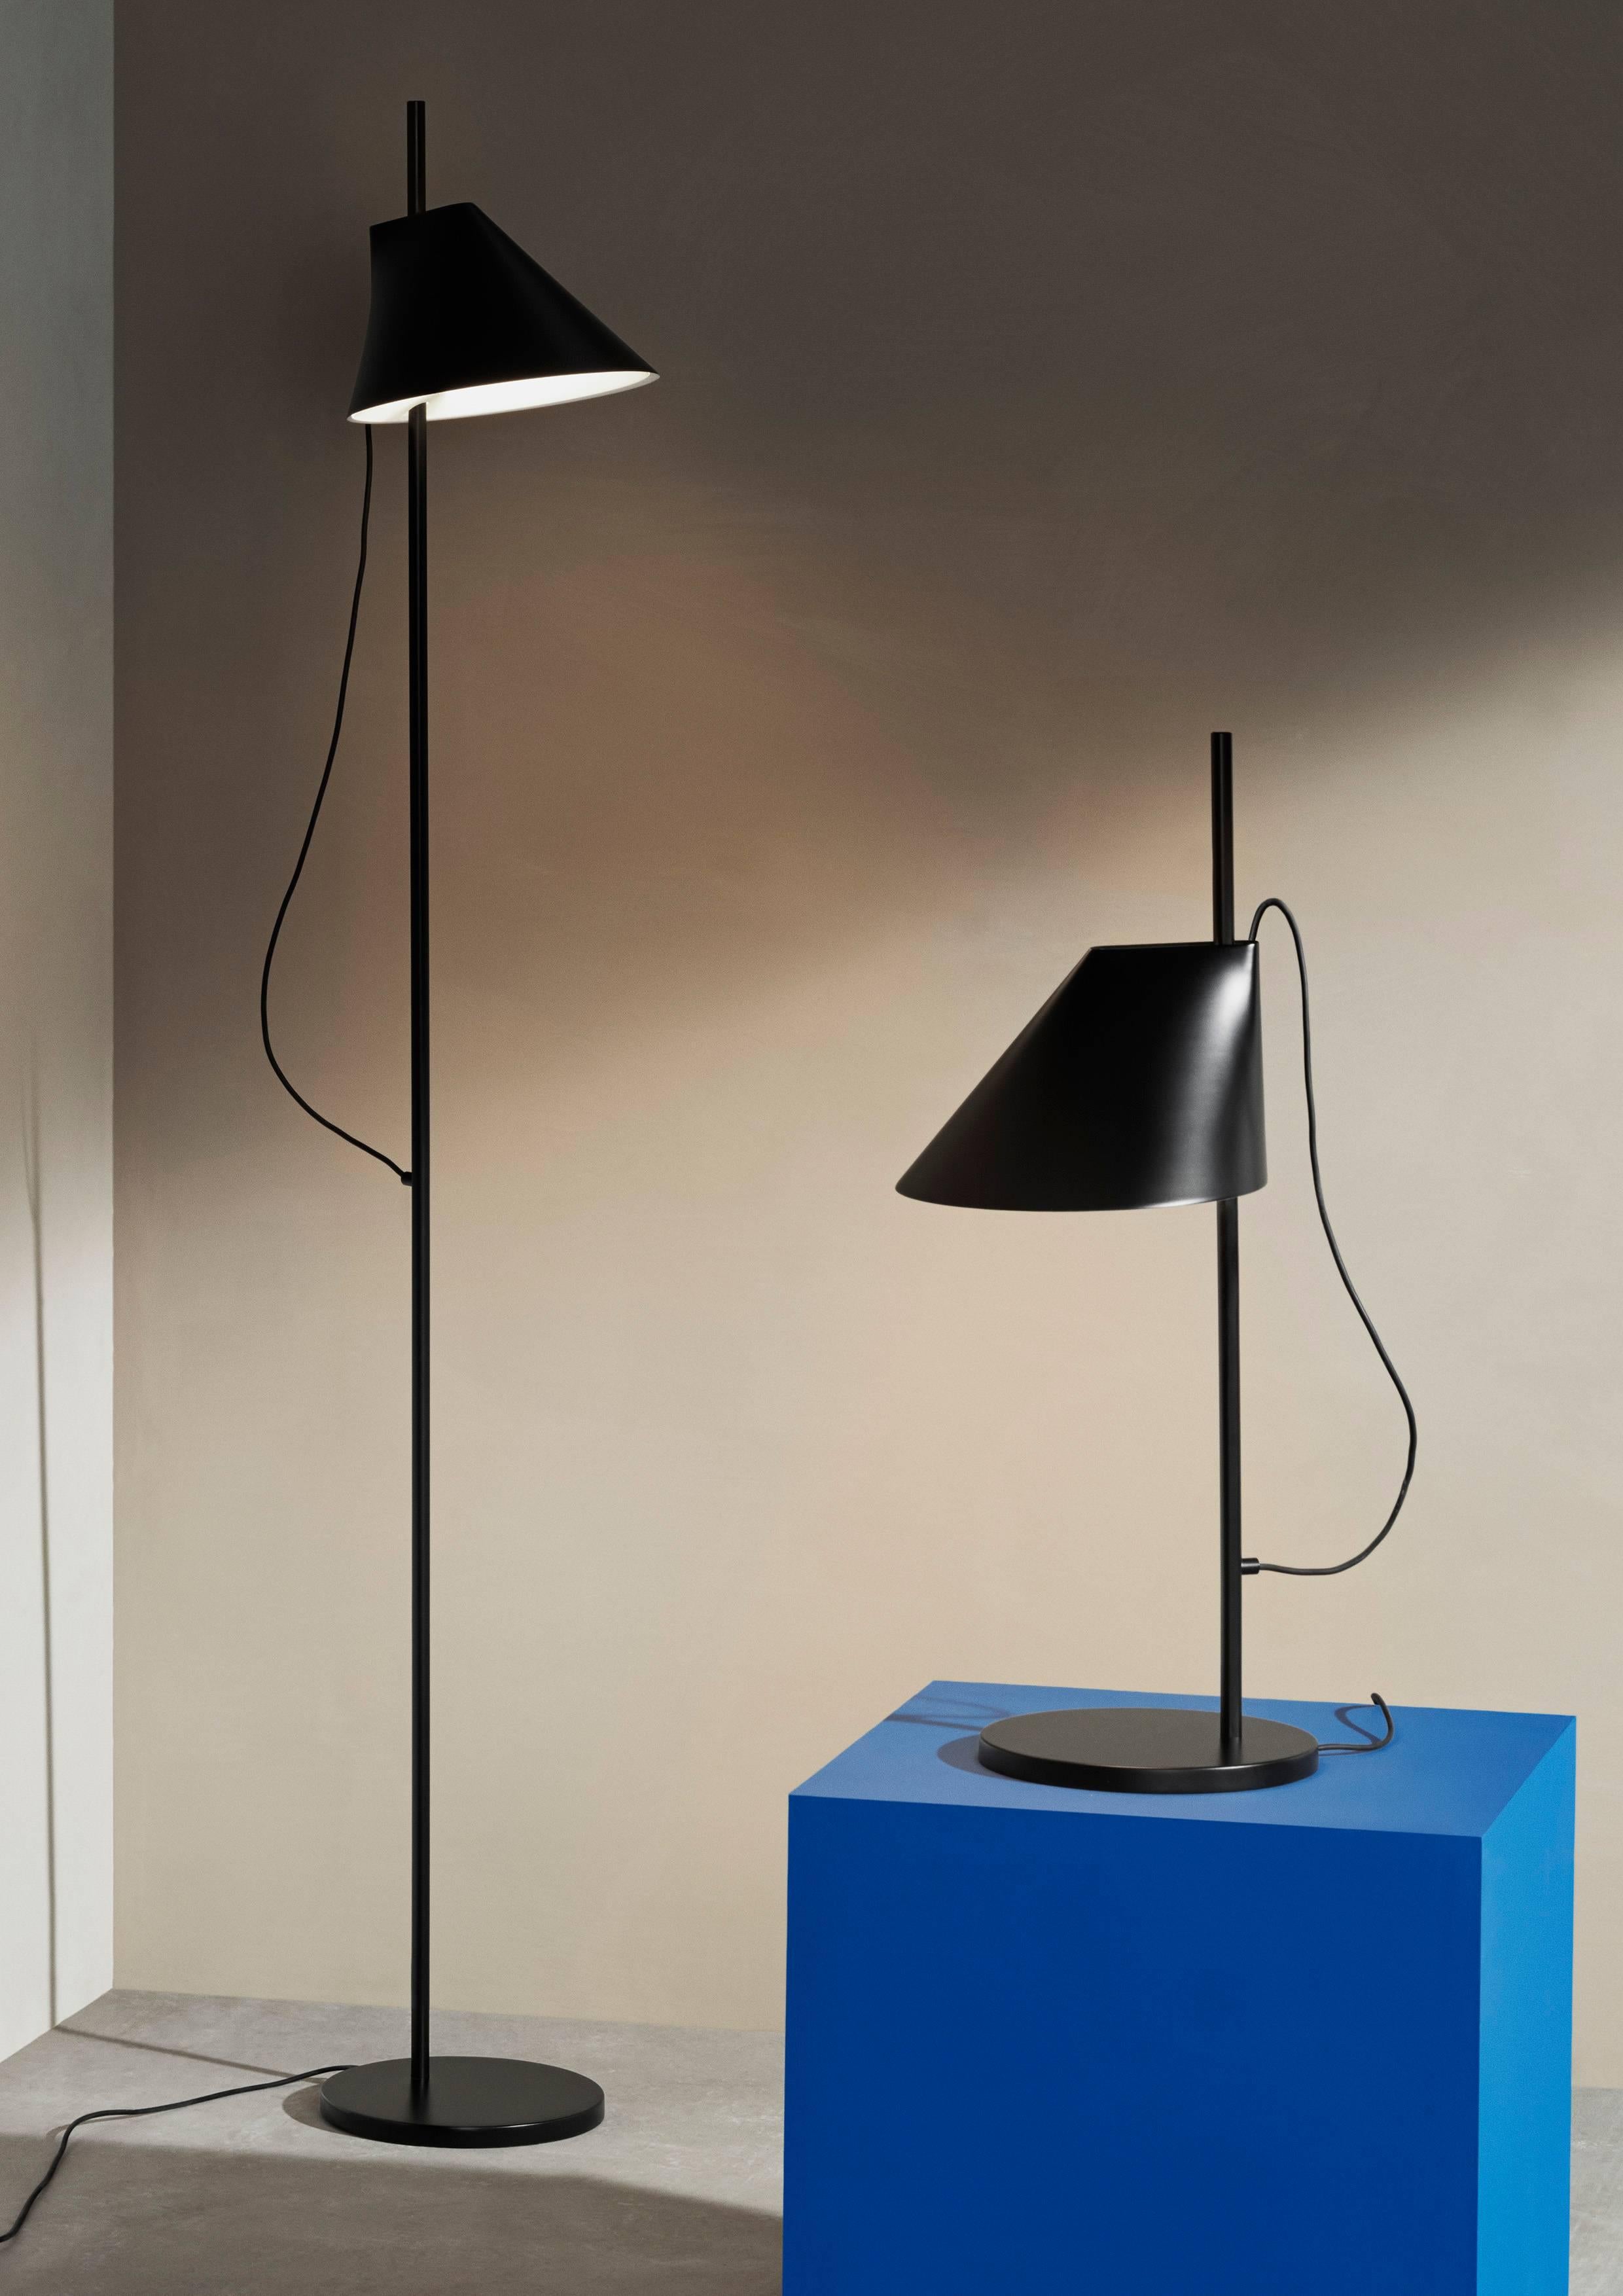 GamFratesi black 'YUH' floor lamp for Louis Poulsen. Designed by Stine Gam and Enrico Fratesi, the YUH reflects Louis Poulsen’s philosophy of designing to shape light. Inspired by the classic virtues of Danish Modernism, Poul Henningsen’s philosophy